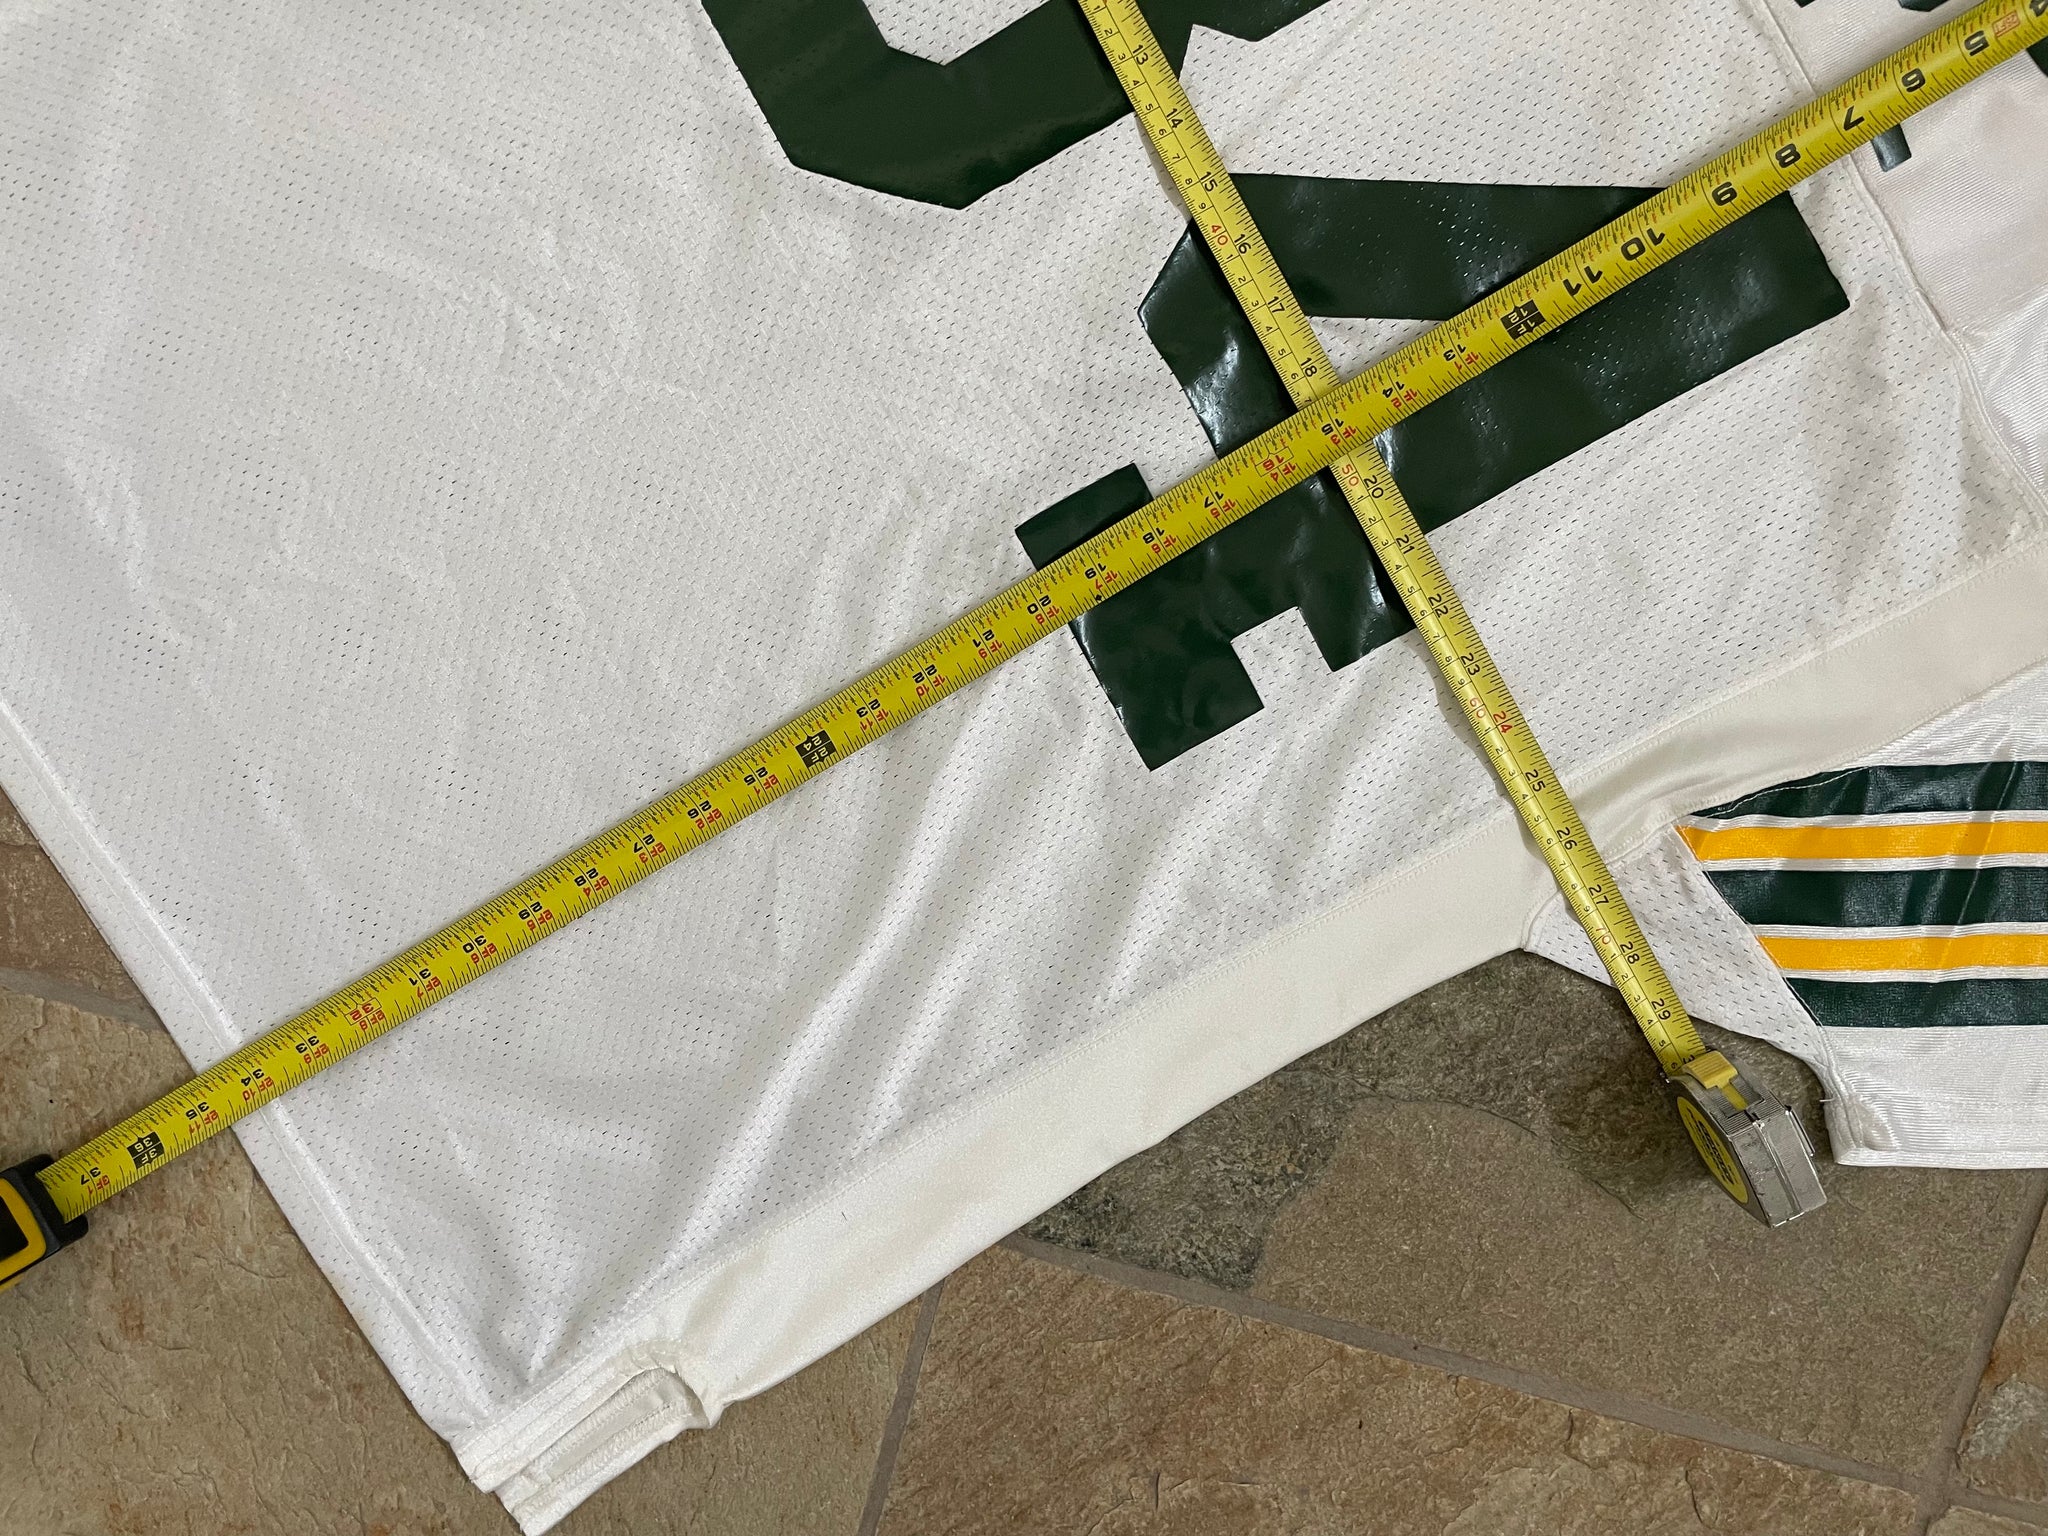 Sterling Sharpe Green Bay Packers Jersey – Classic Authentics